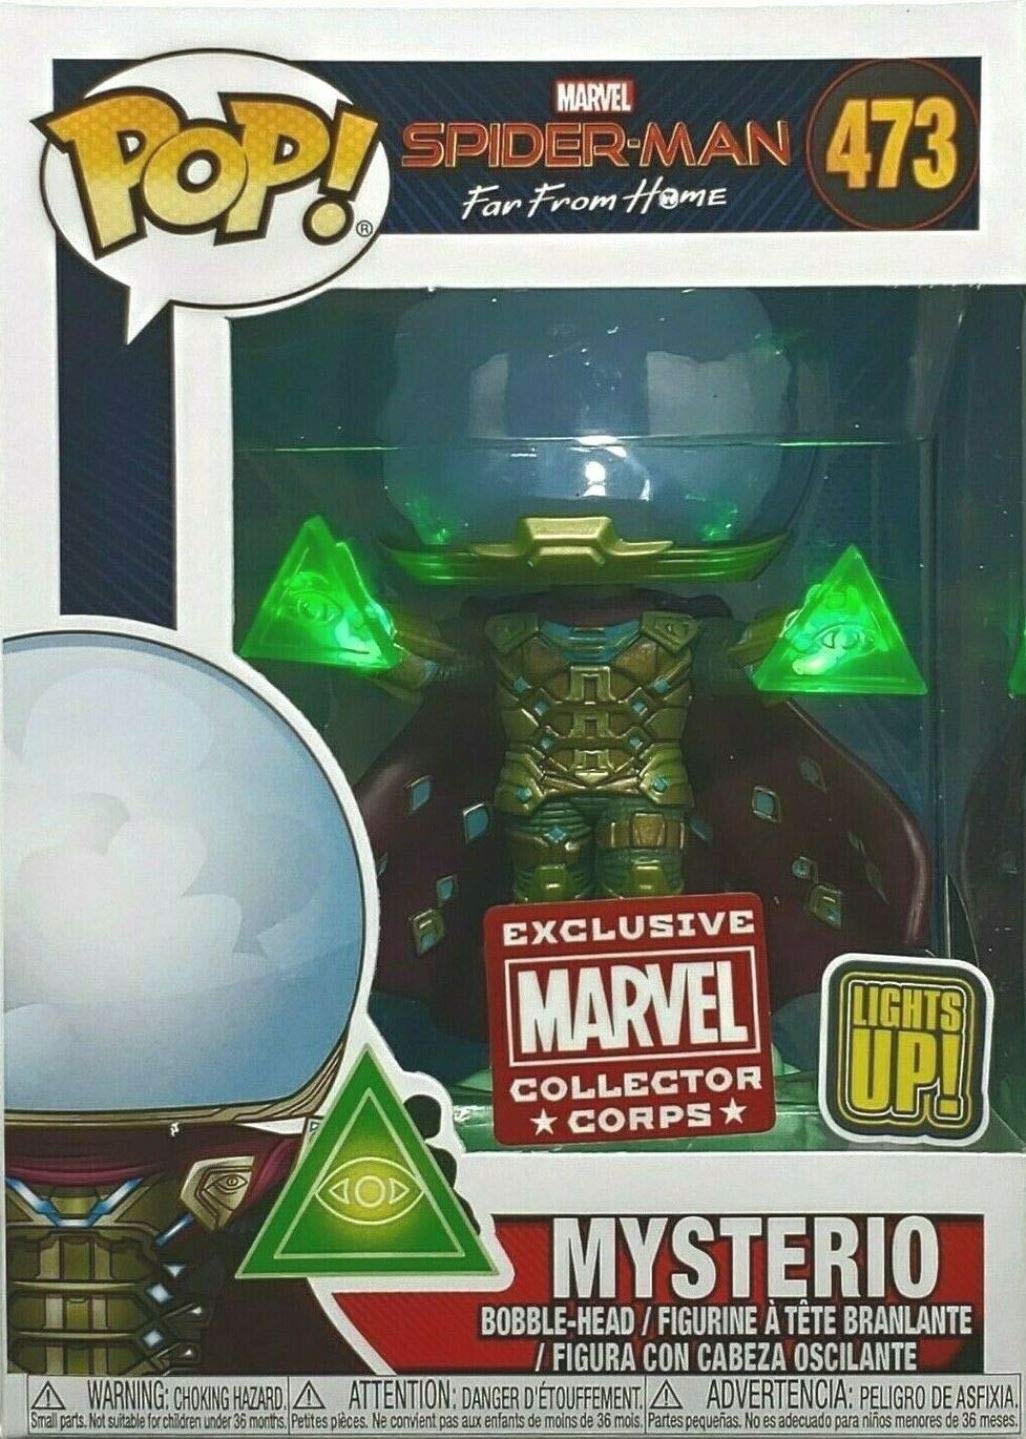 Funko POP! Marvel Spider-Man Far From Home Mysterio #473 [Light Up] Collector Corps Exclusive